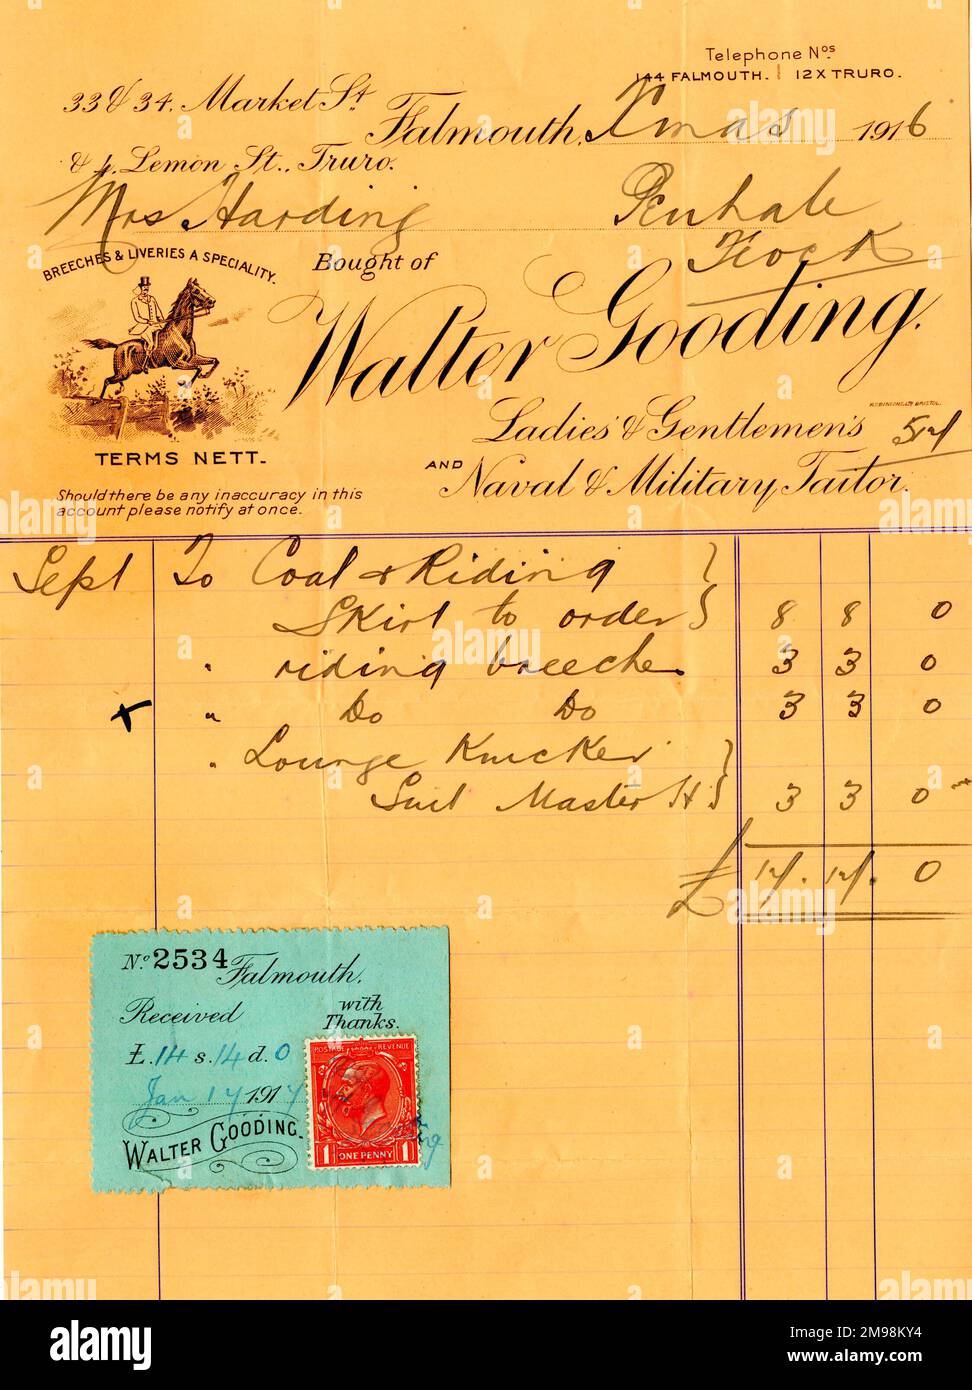 Stationery, Walter Gooding, tailor, with handwritten details for riding clothes. Stock Photo